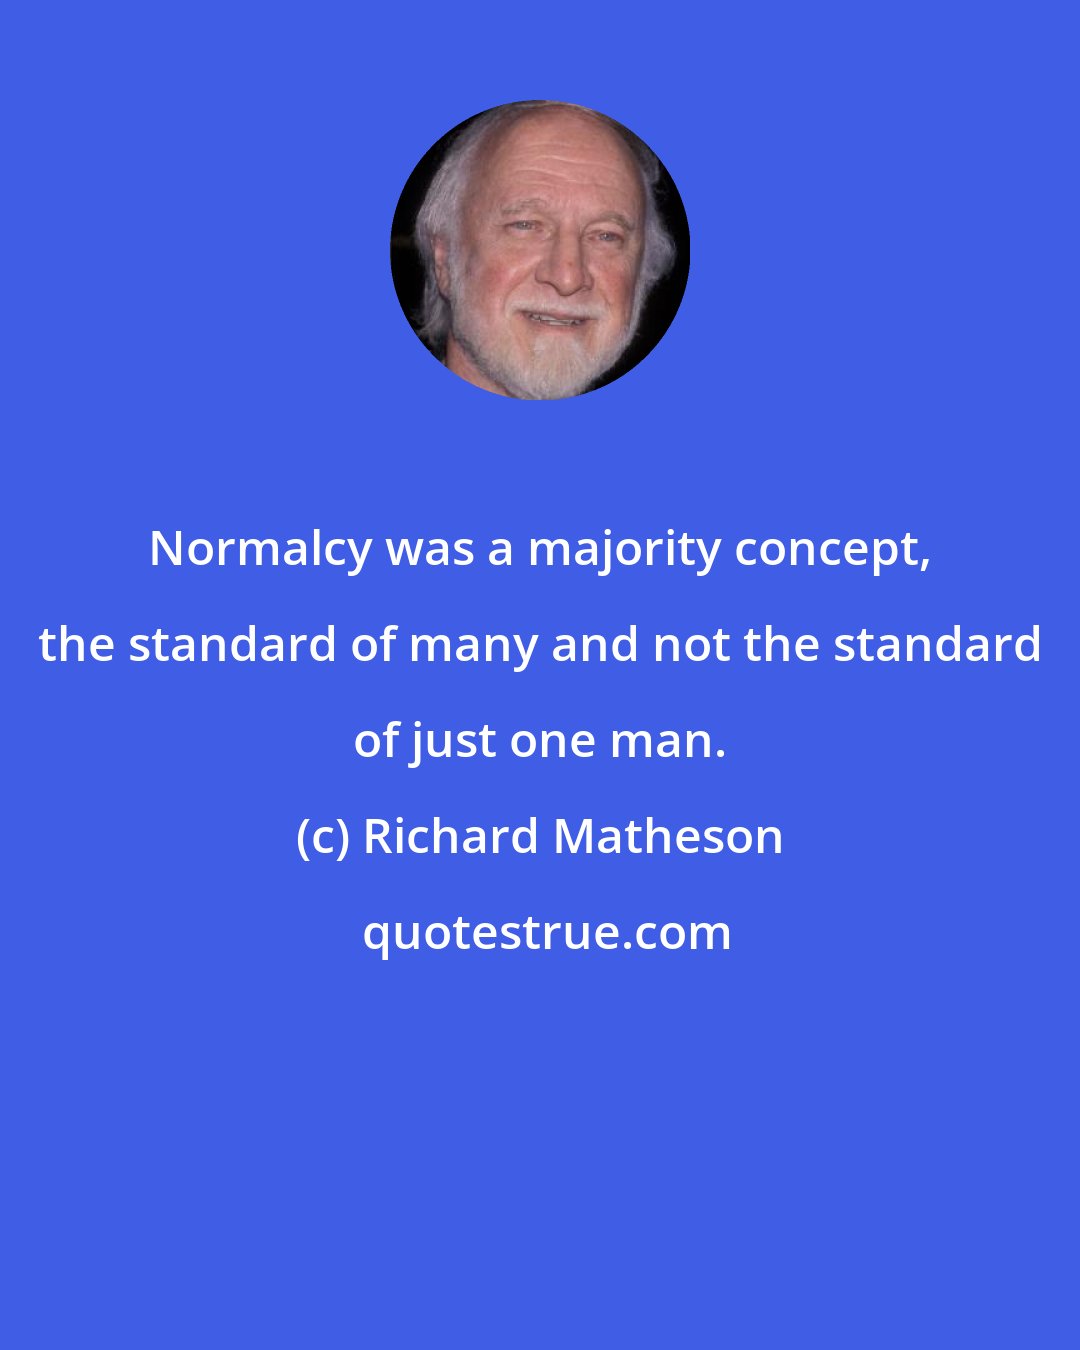 Richard Matheson: Normalcy was a majority concept, the standard of many and not the standard of just one man.